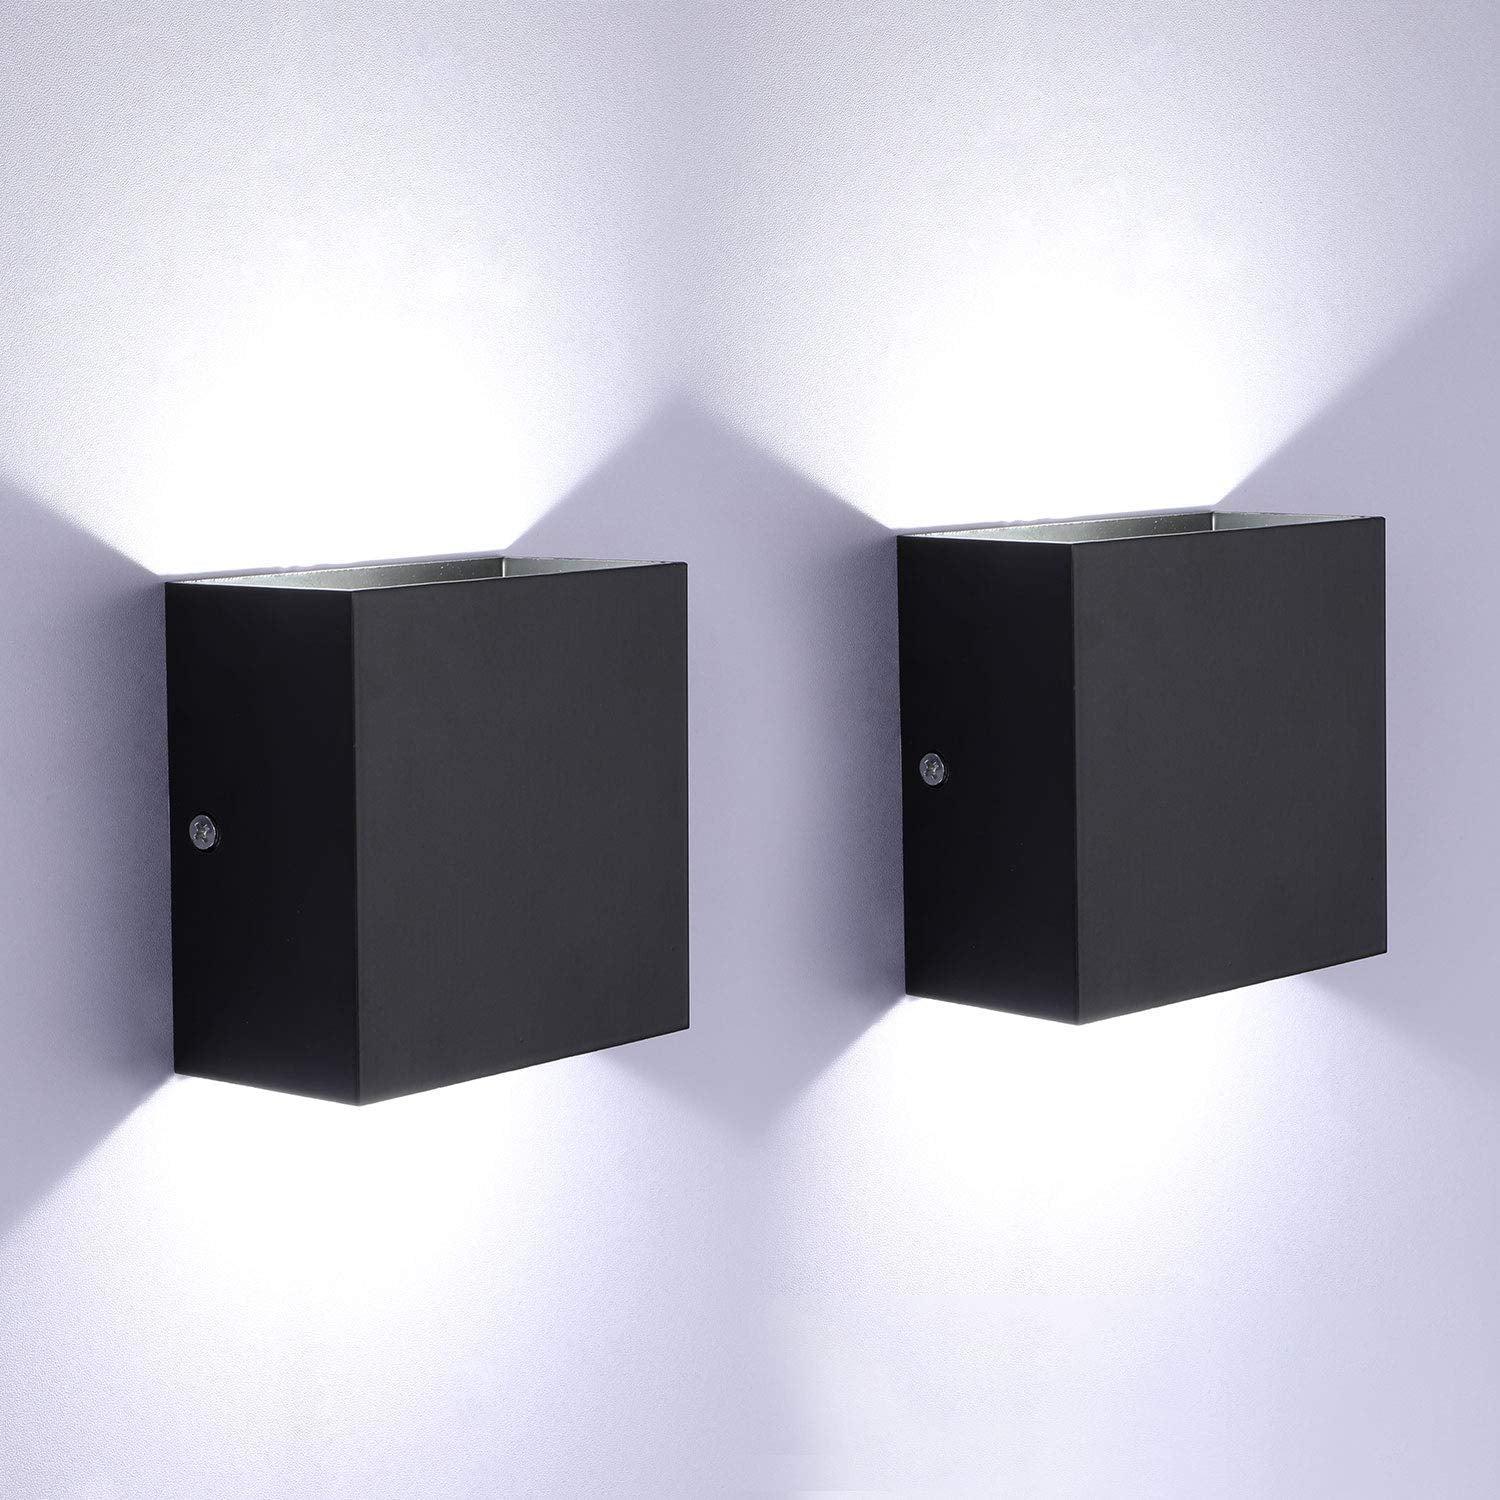 Glighone 2Pcs LED Wall Lights Indoor Up Down Wall Lamp Wall Wash Light Wall Sconce Black 6W Modern Aluminum Lighting for Living Room, Bedroom, Hallway, Corridor, Stairs, Cool White 4